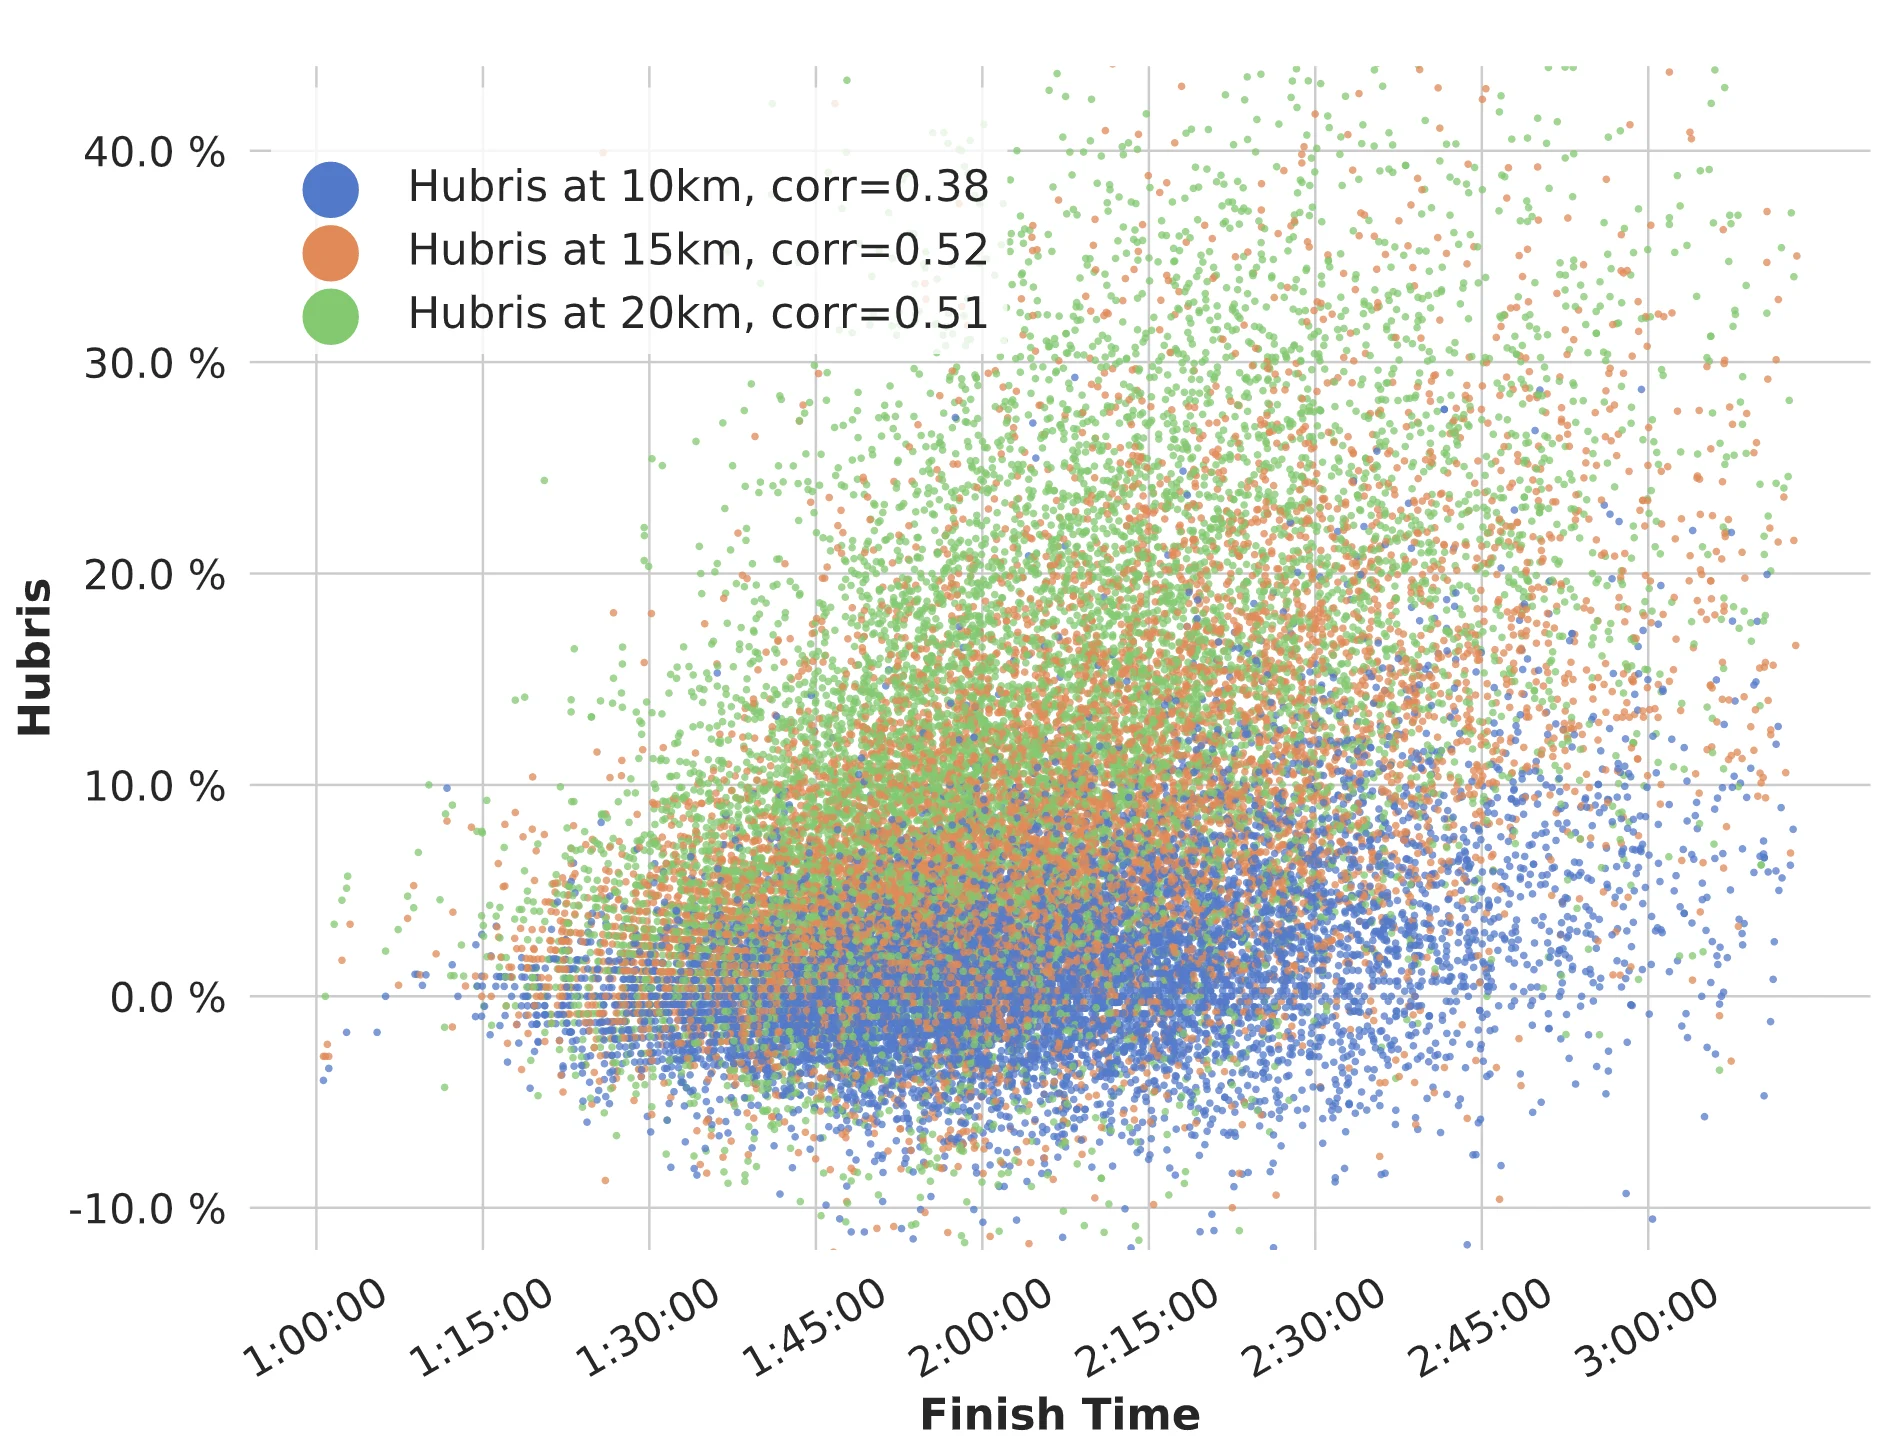 Hubris versus Finish Time for sampled points (30 000). Legend shows correlation to finish time.